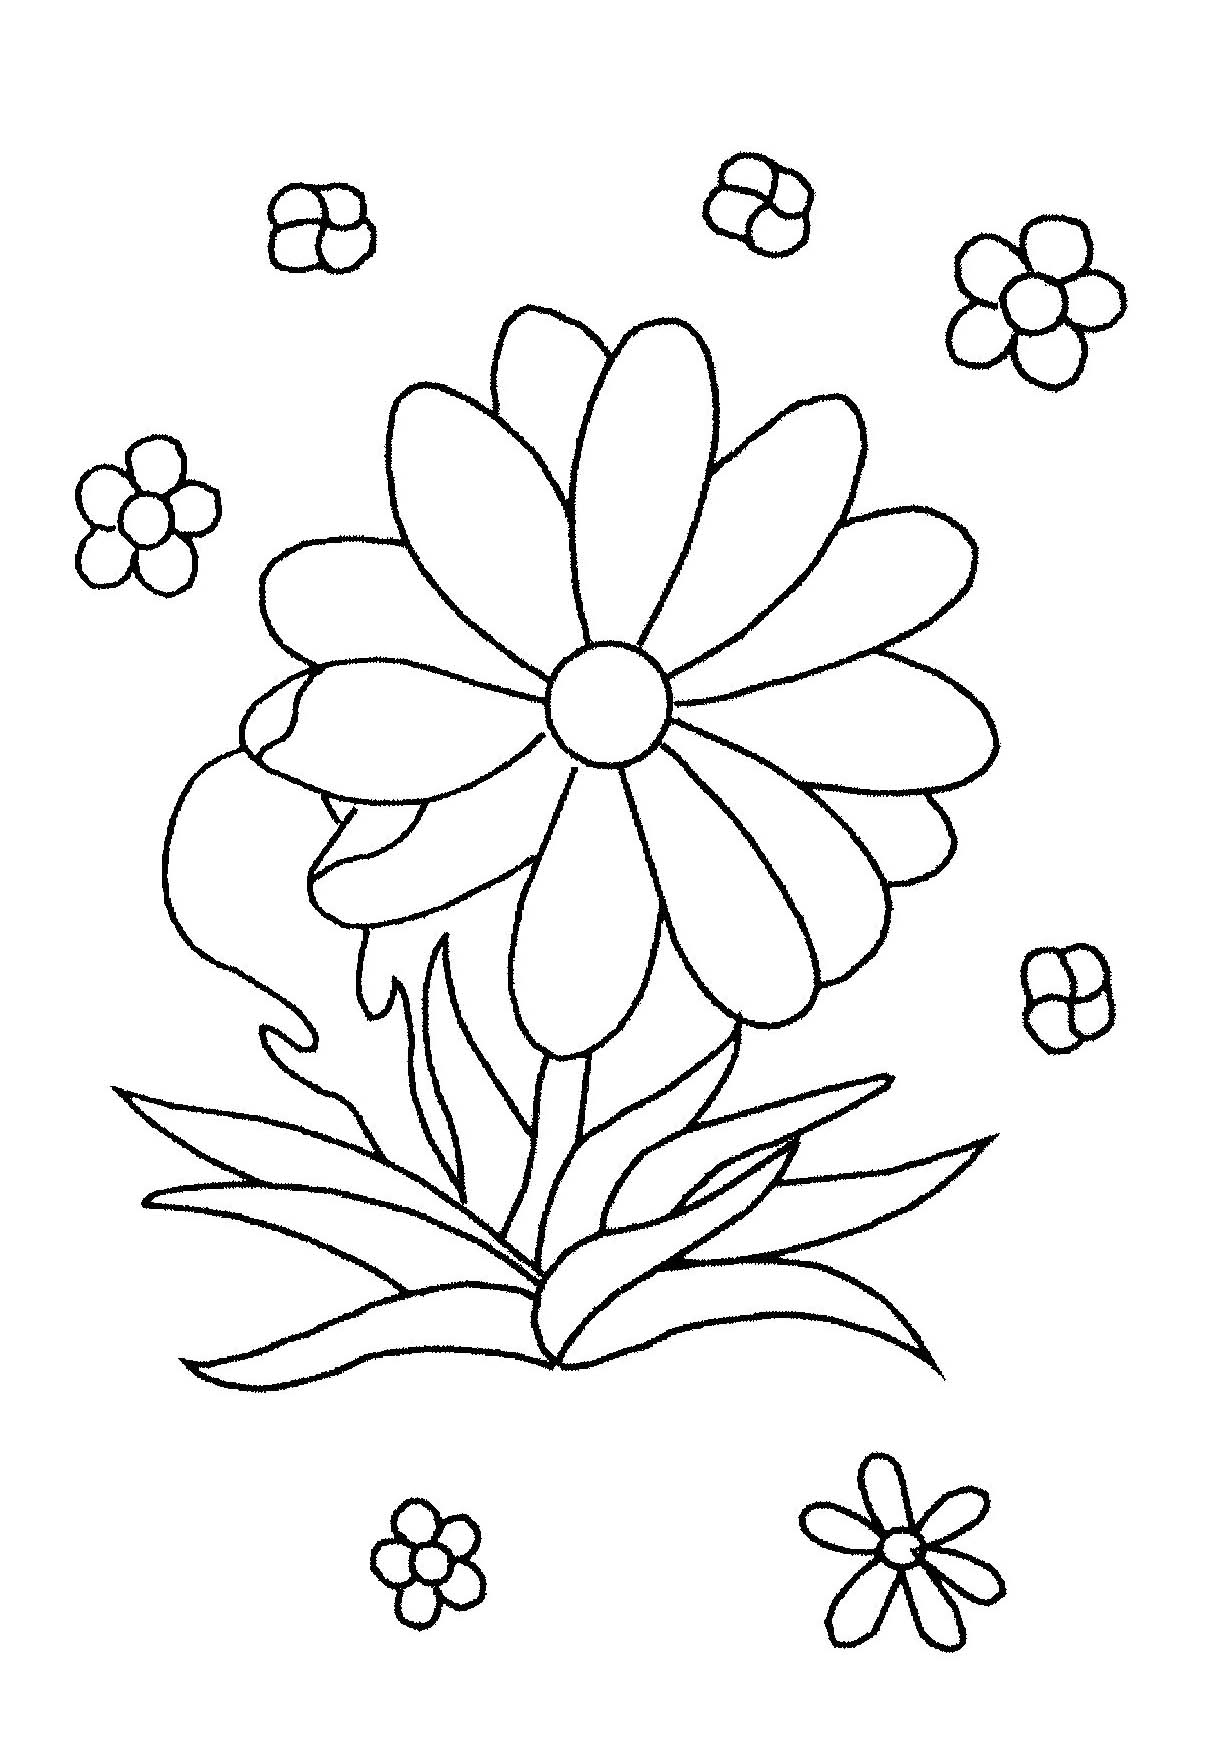 Simple flower for a coloring for young children